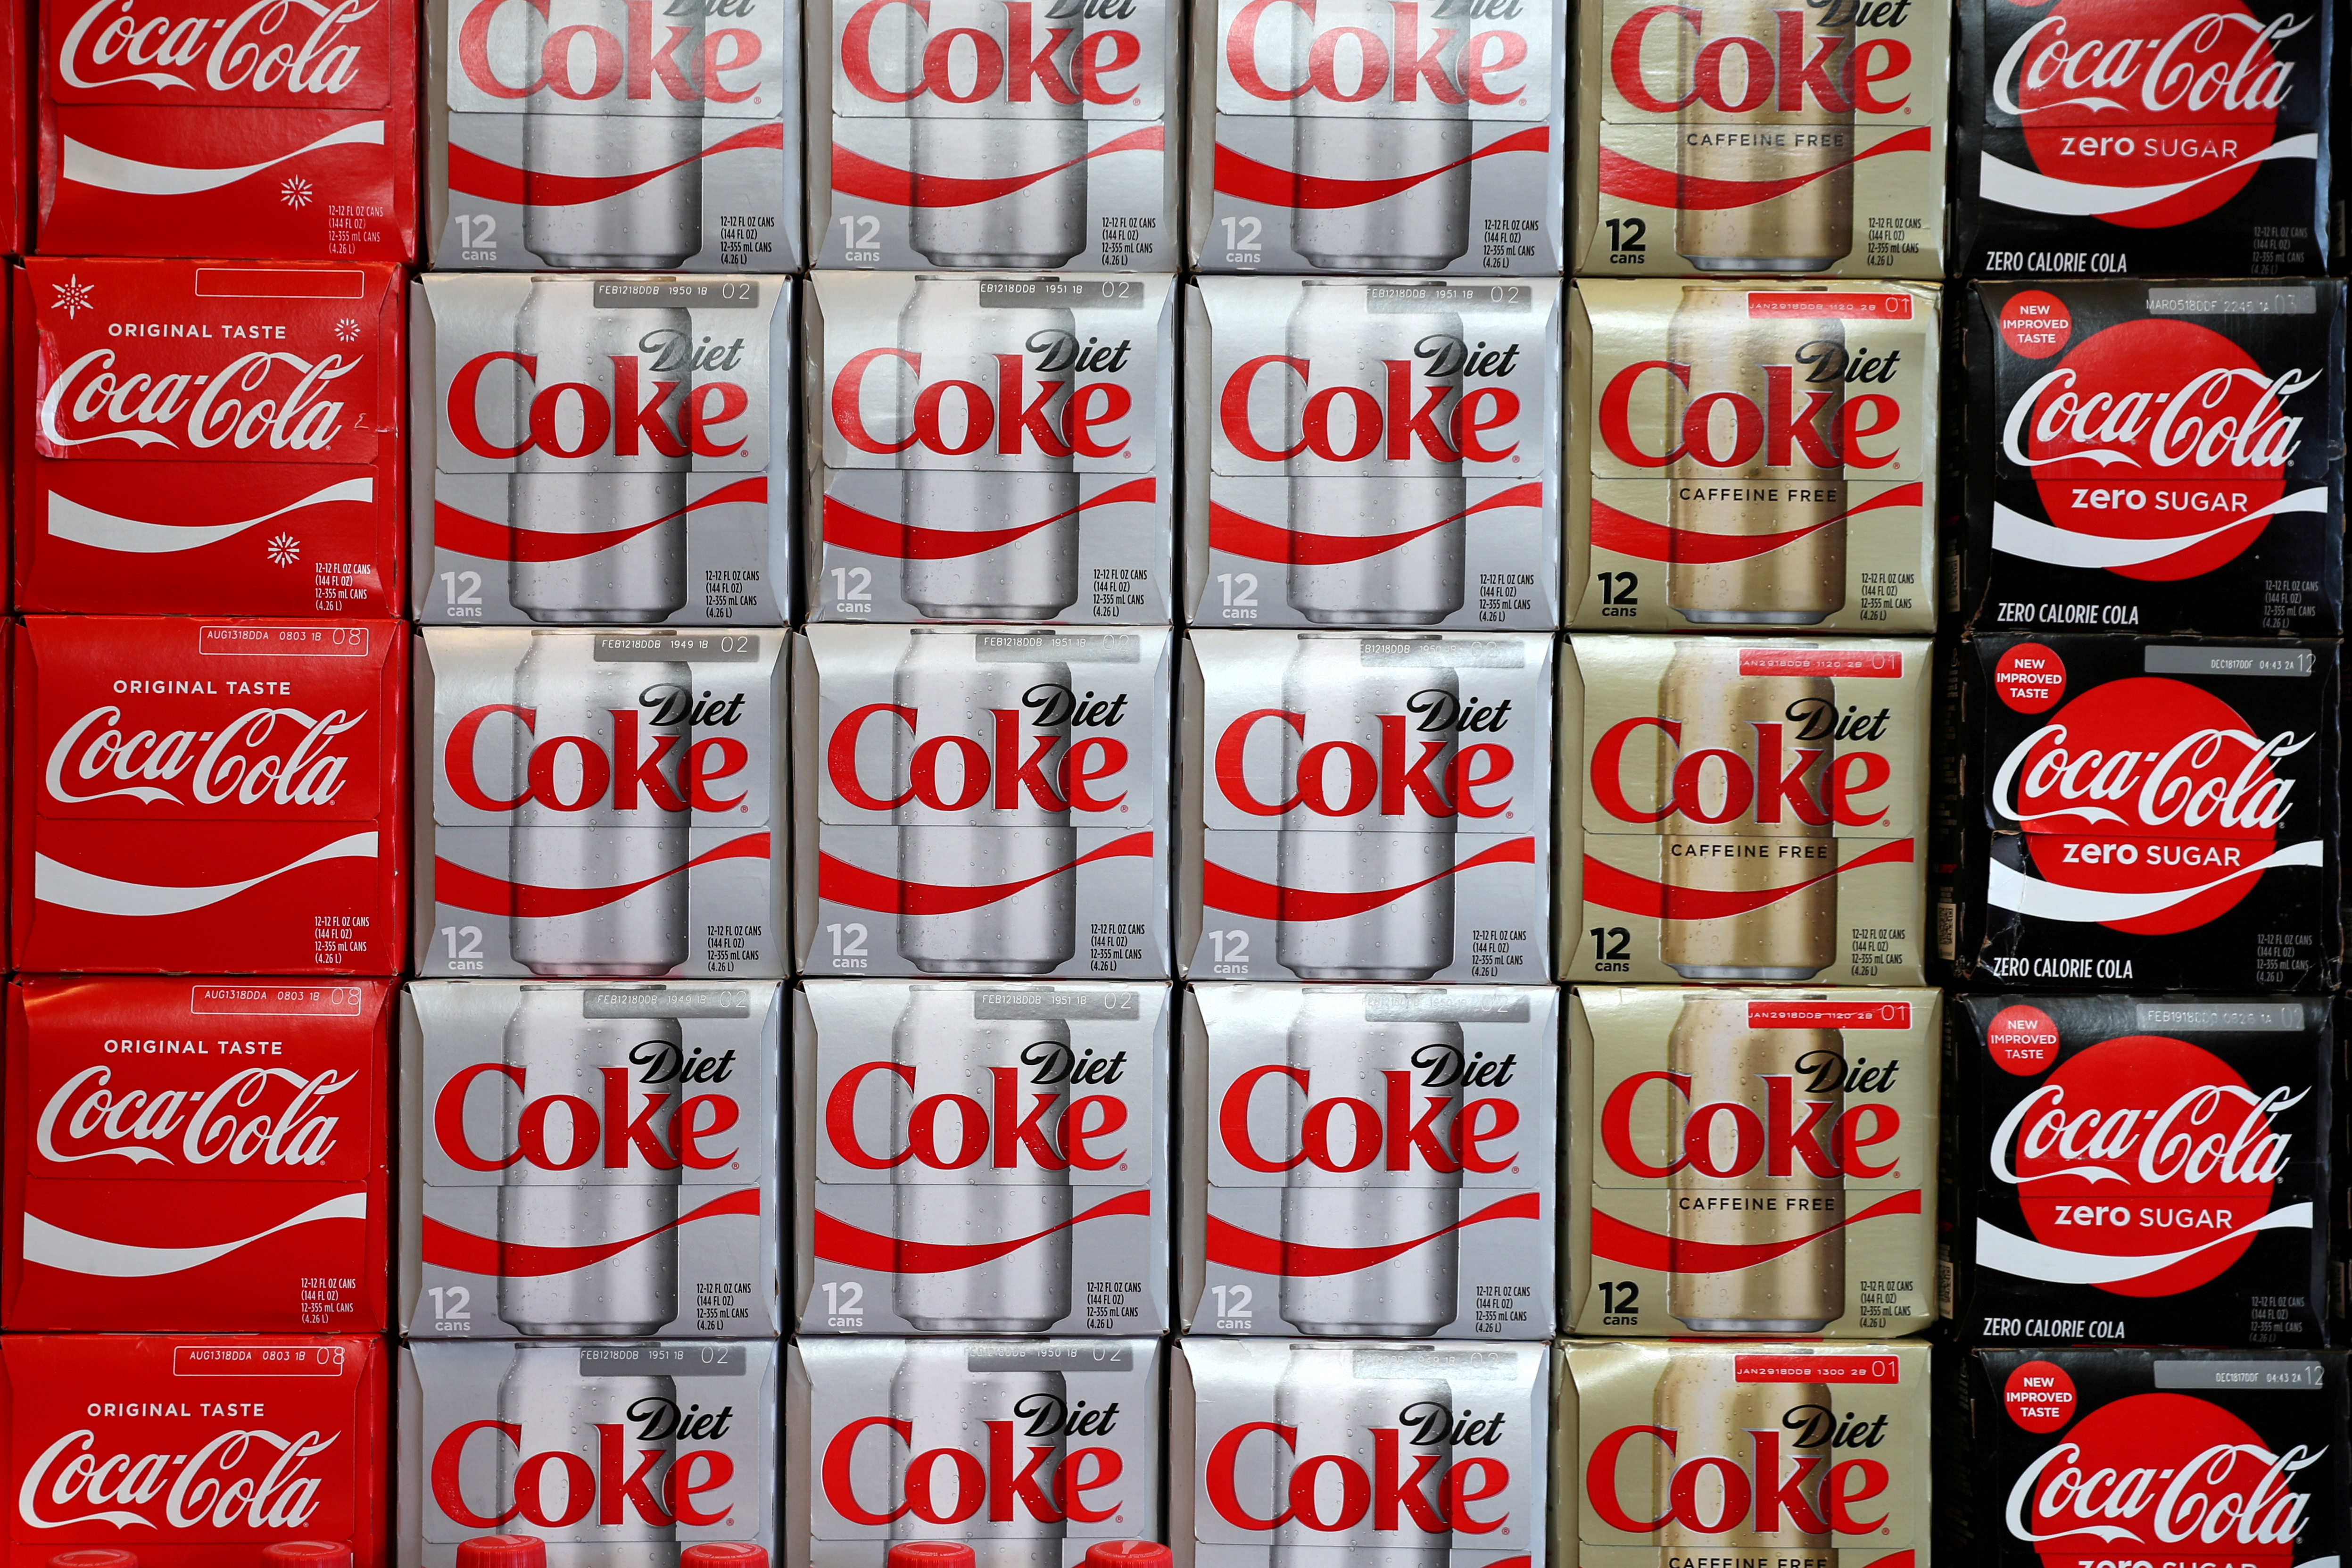 Boxes of Coca-Cola are seen at a grocery store in Los Angeles